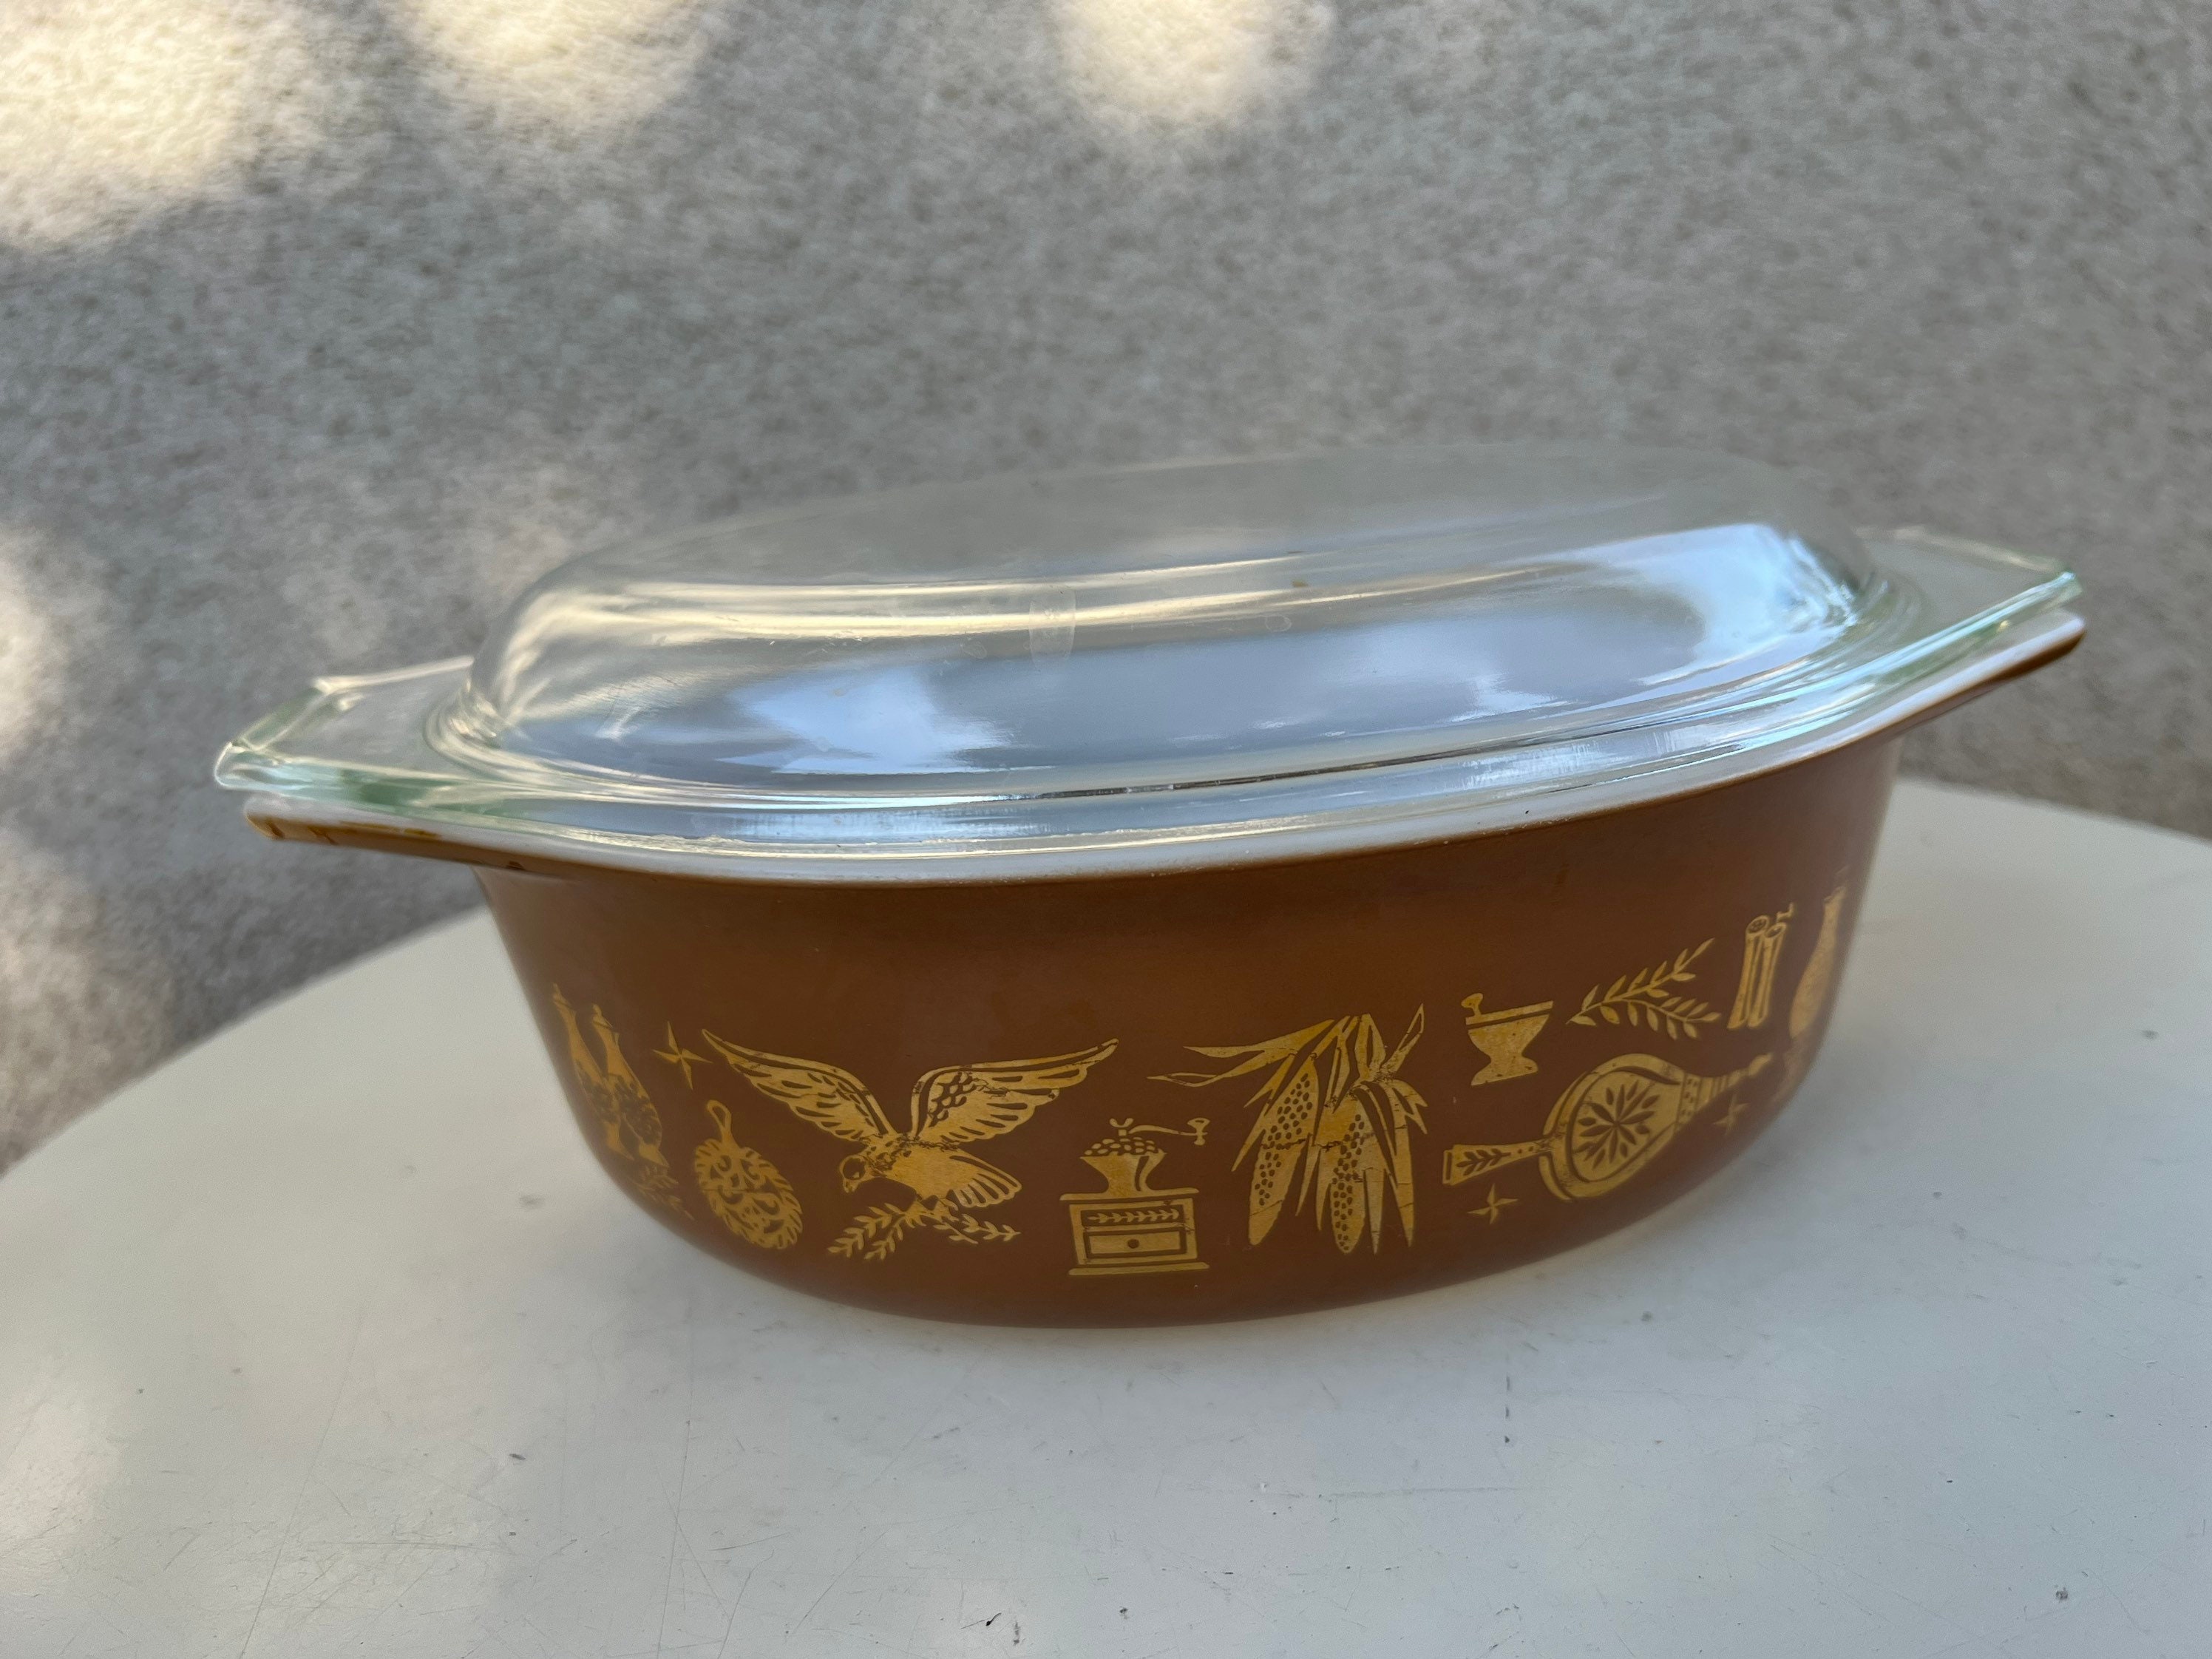 Pyrex Divided Casserole Dish With Lid Early American Brown 1 1/2 Quart  Vintage